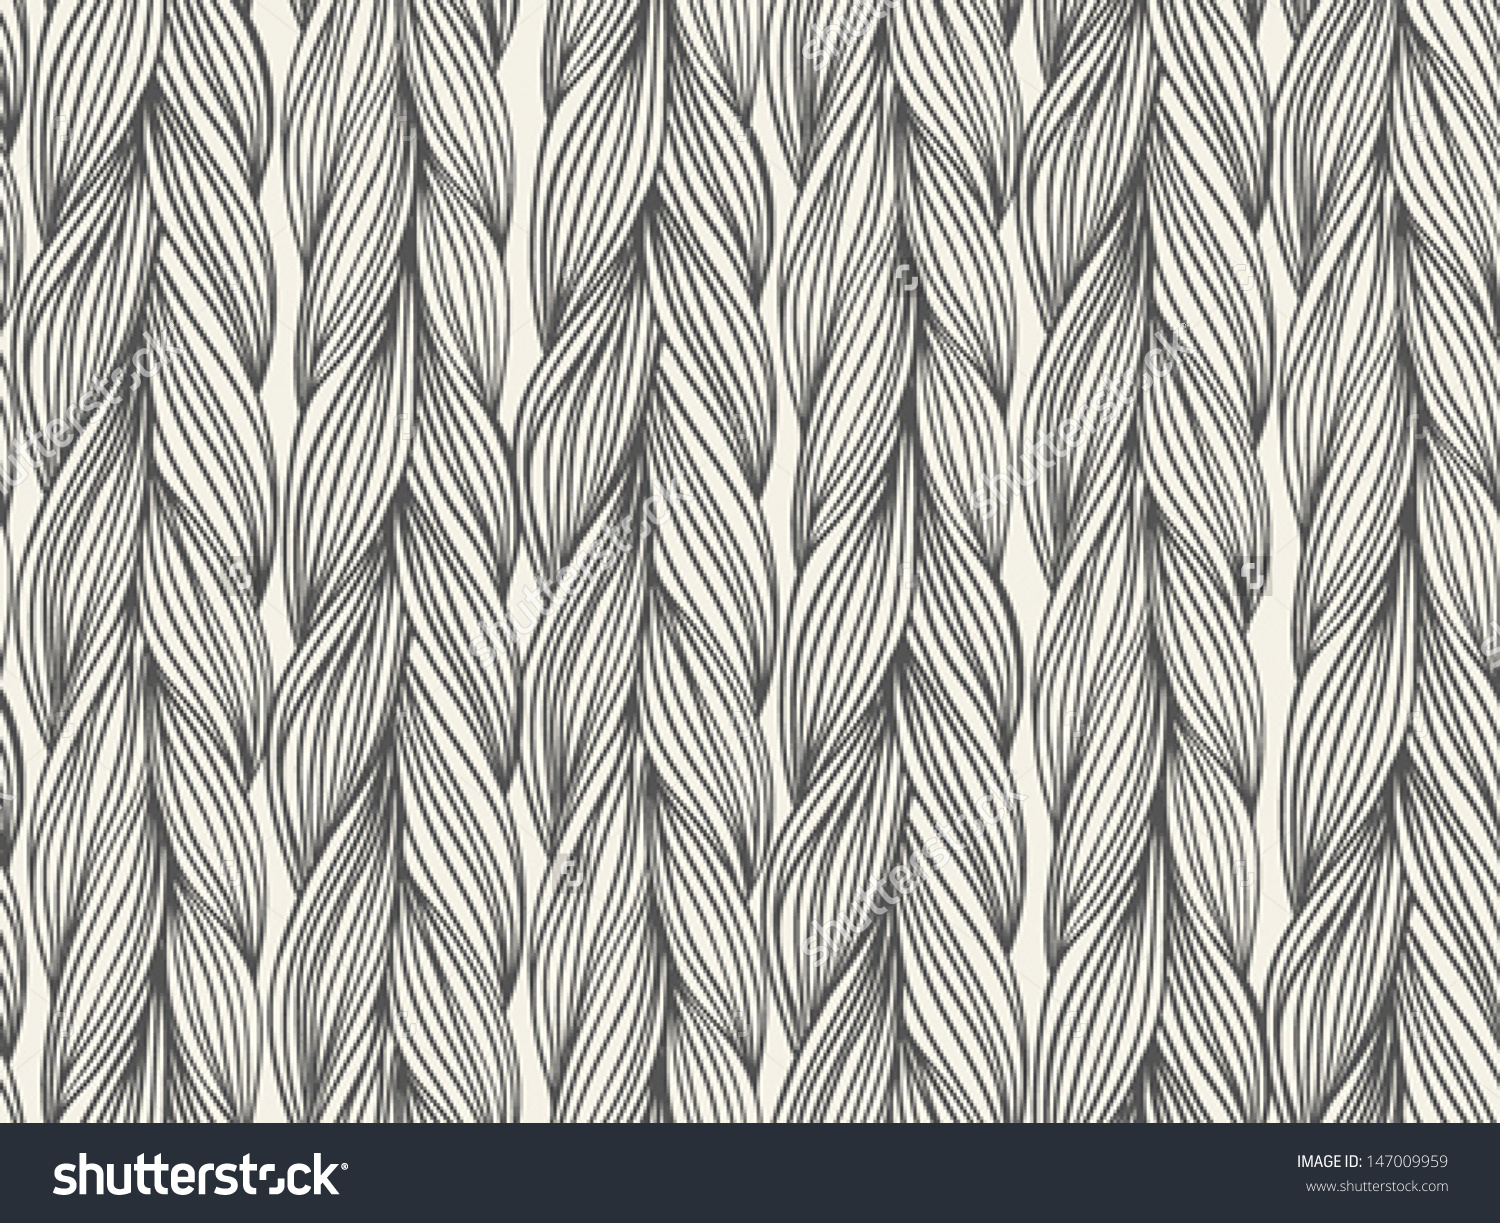 Simple bold vector seamless pattern with stylized sweater fabric